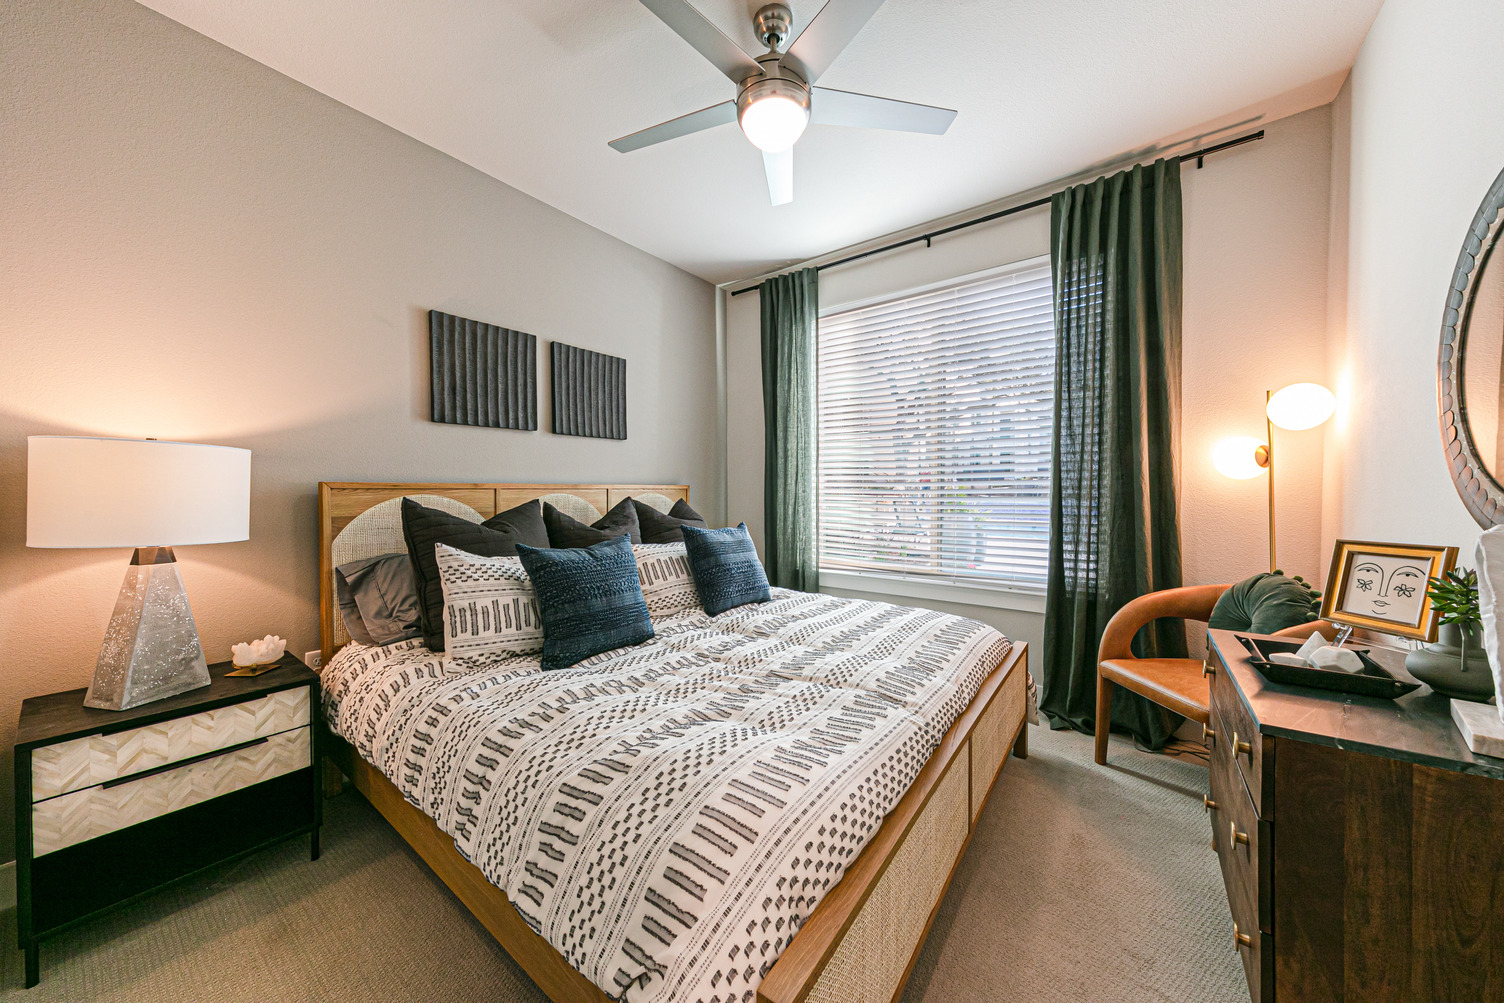 Model apartment bedroom with carpeting, ceiling fan, queen bed, and large window with blinds